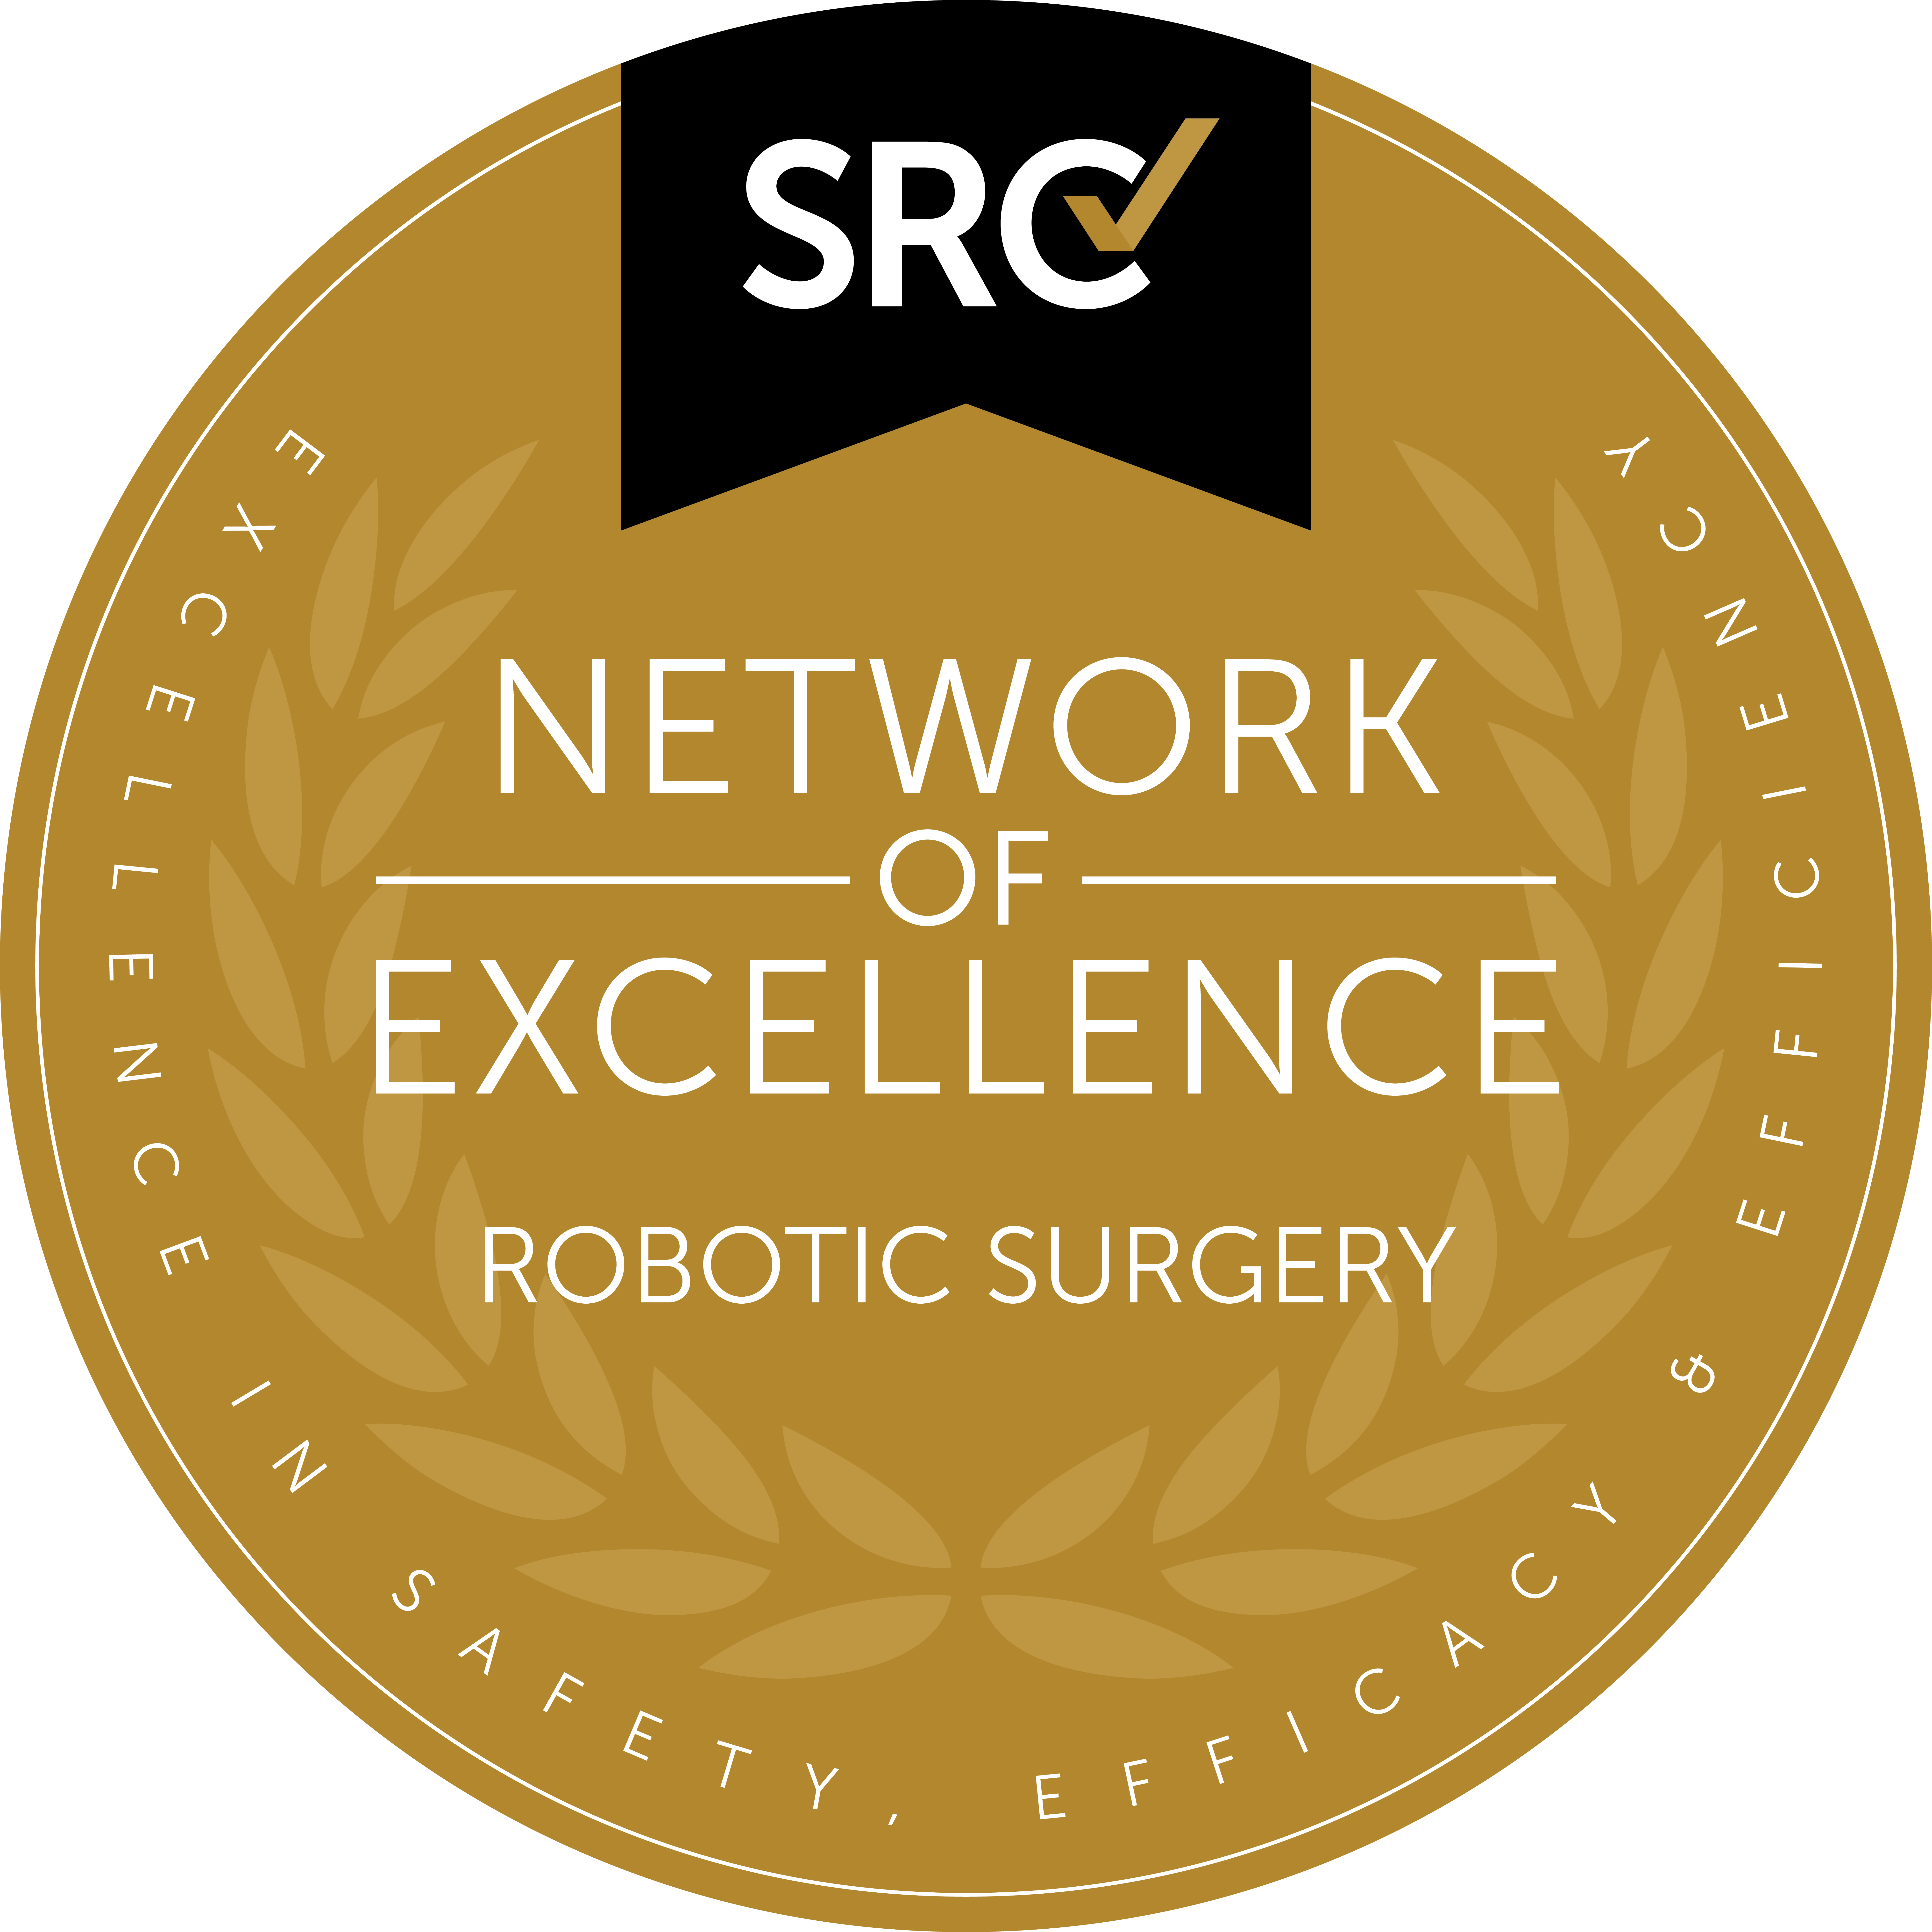 SRC Network of Excellence in Robotic Surgery logo